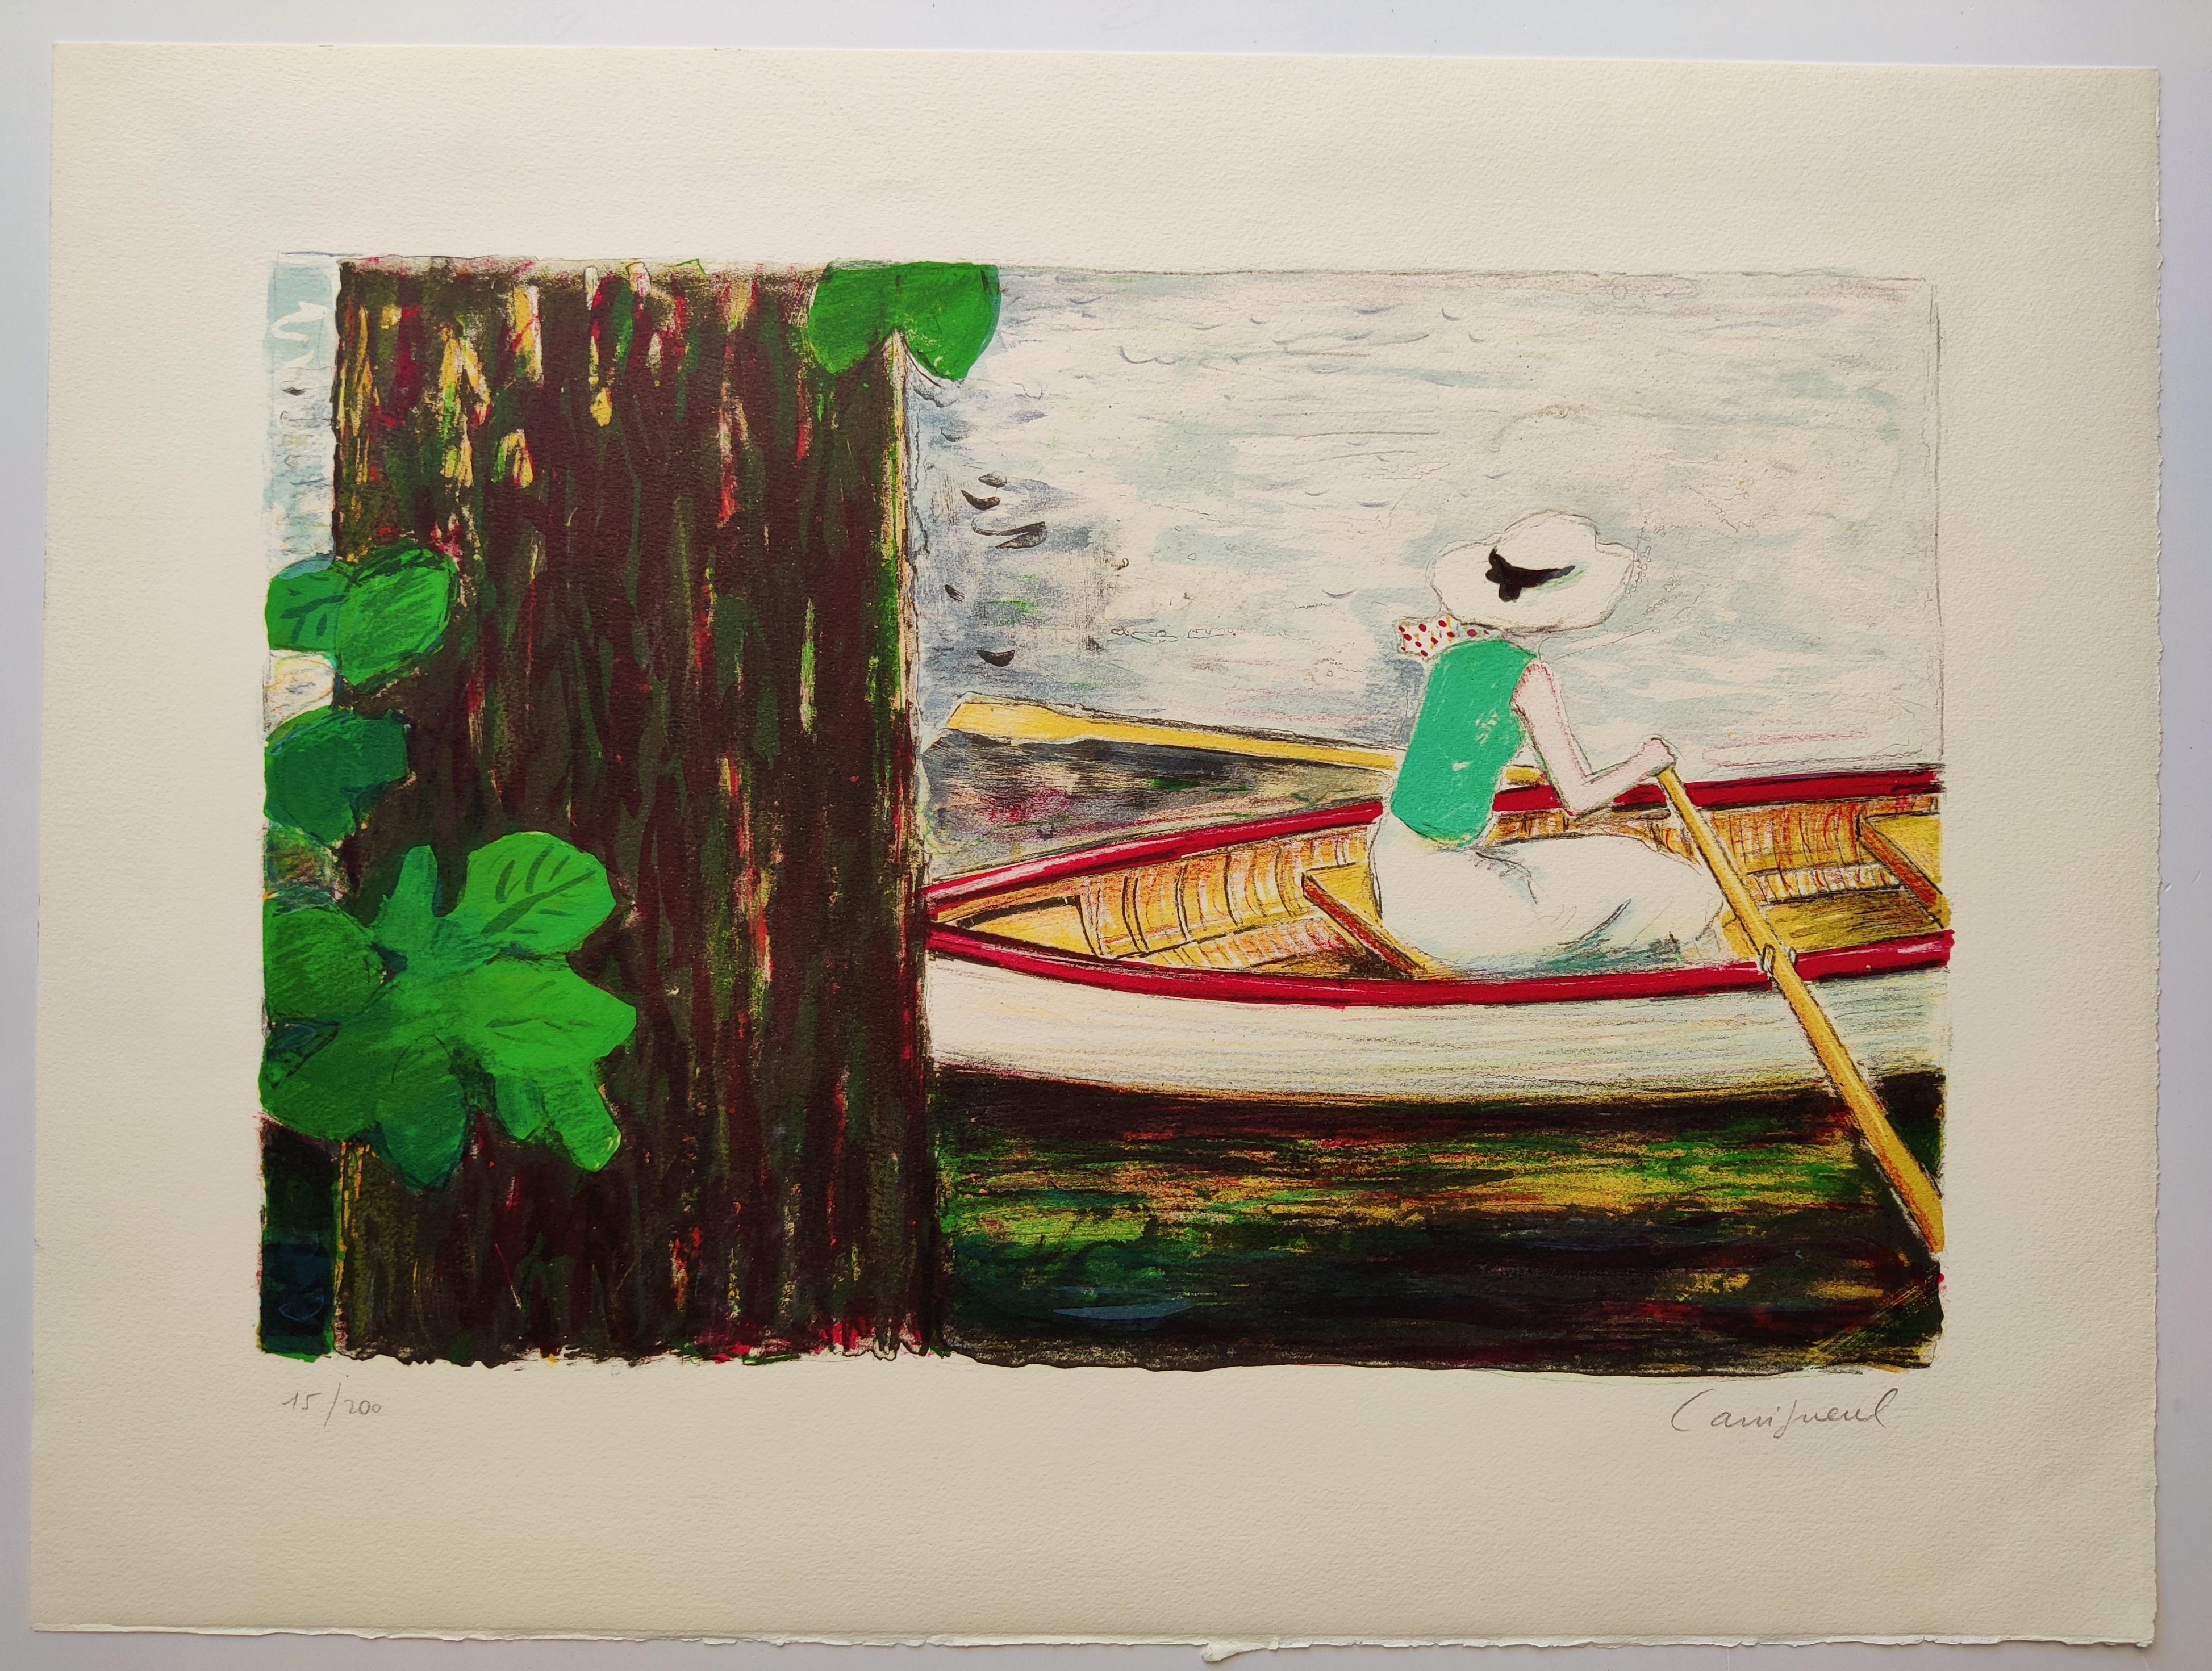 Jean-Pierre Cassigneul 
Title: Boat, 1973
Lithograph 
Edition 15 /200 lower left
Hand Signed lower right
Image size: 49 x 32.5 cm
Sheet size: 62.5 x 45.8 cm
